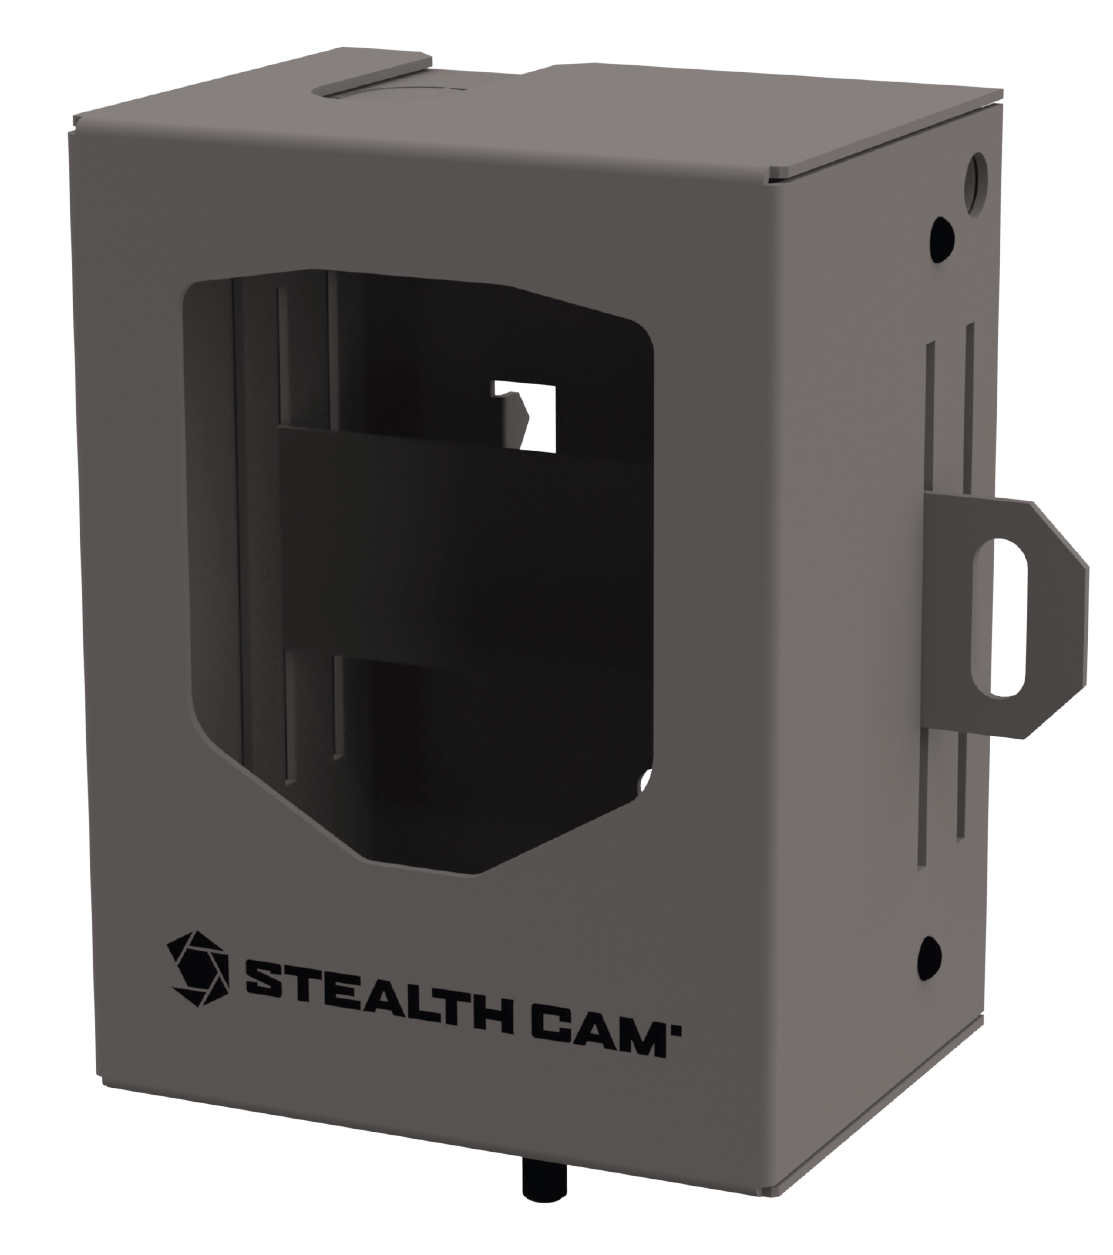 Stealth Cam Stealth Cam Security Box, Steal Stc-bb-lg     Large Security Box G Gx Xv Ds Hunting